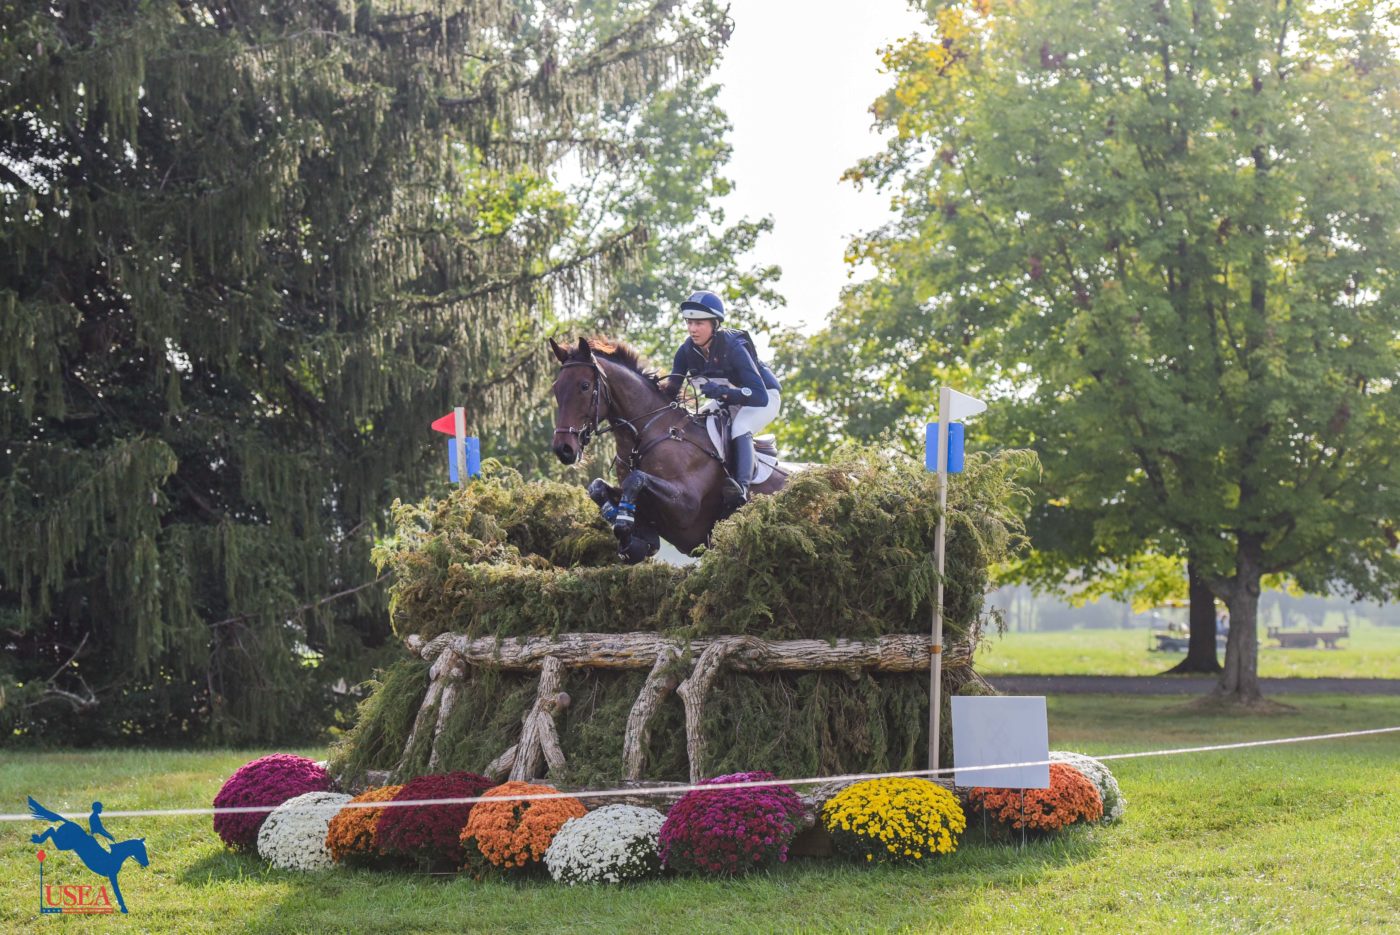 CCI4*-L - 8th - Isabelle Bosley & Night Quality